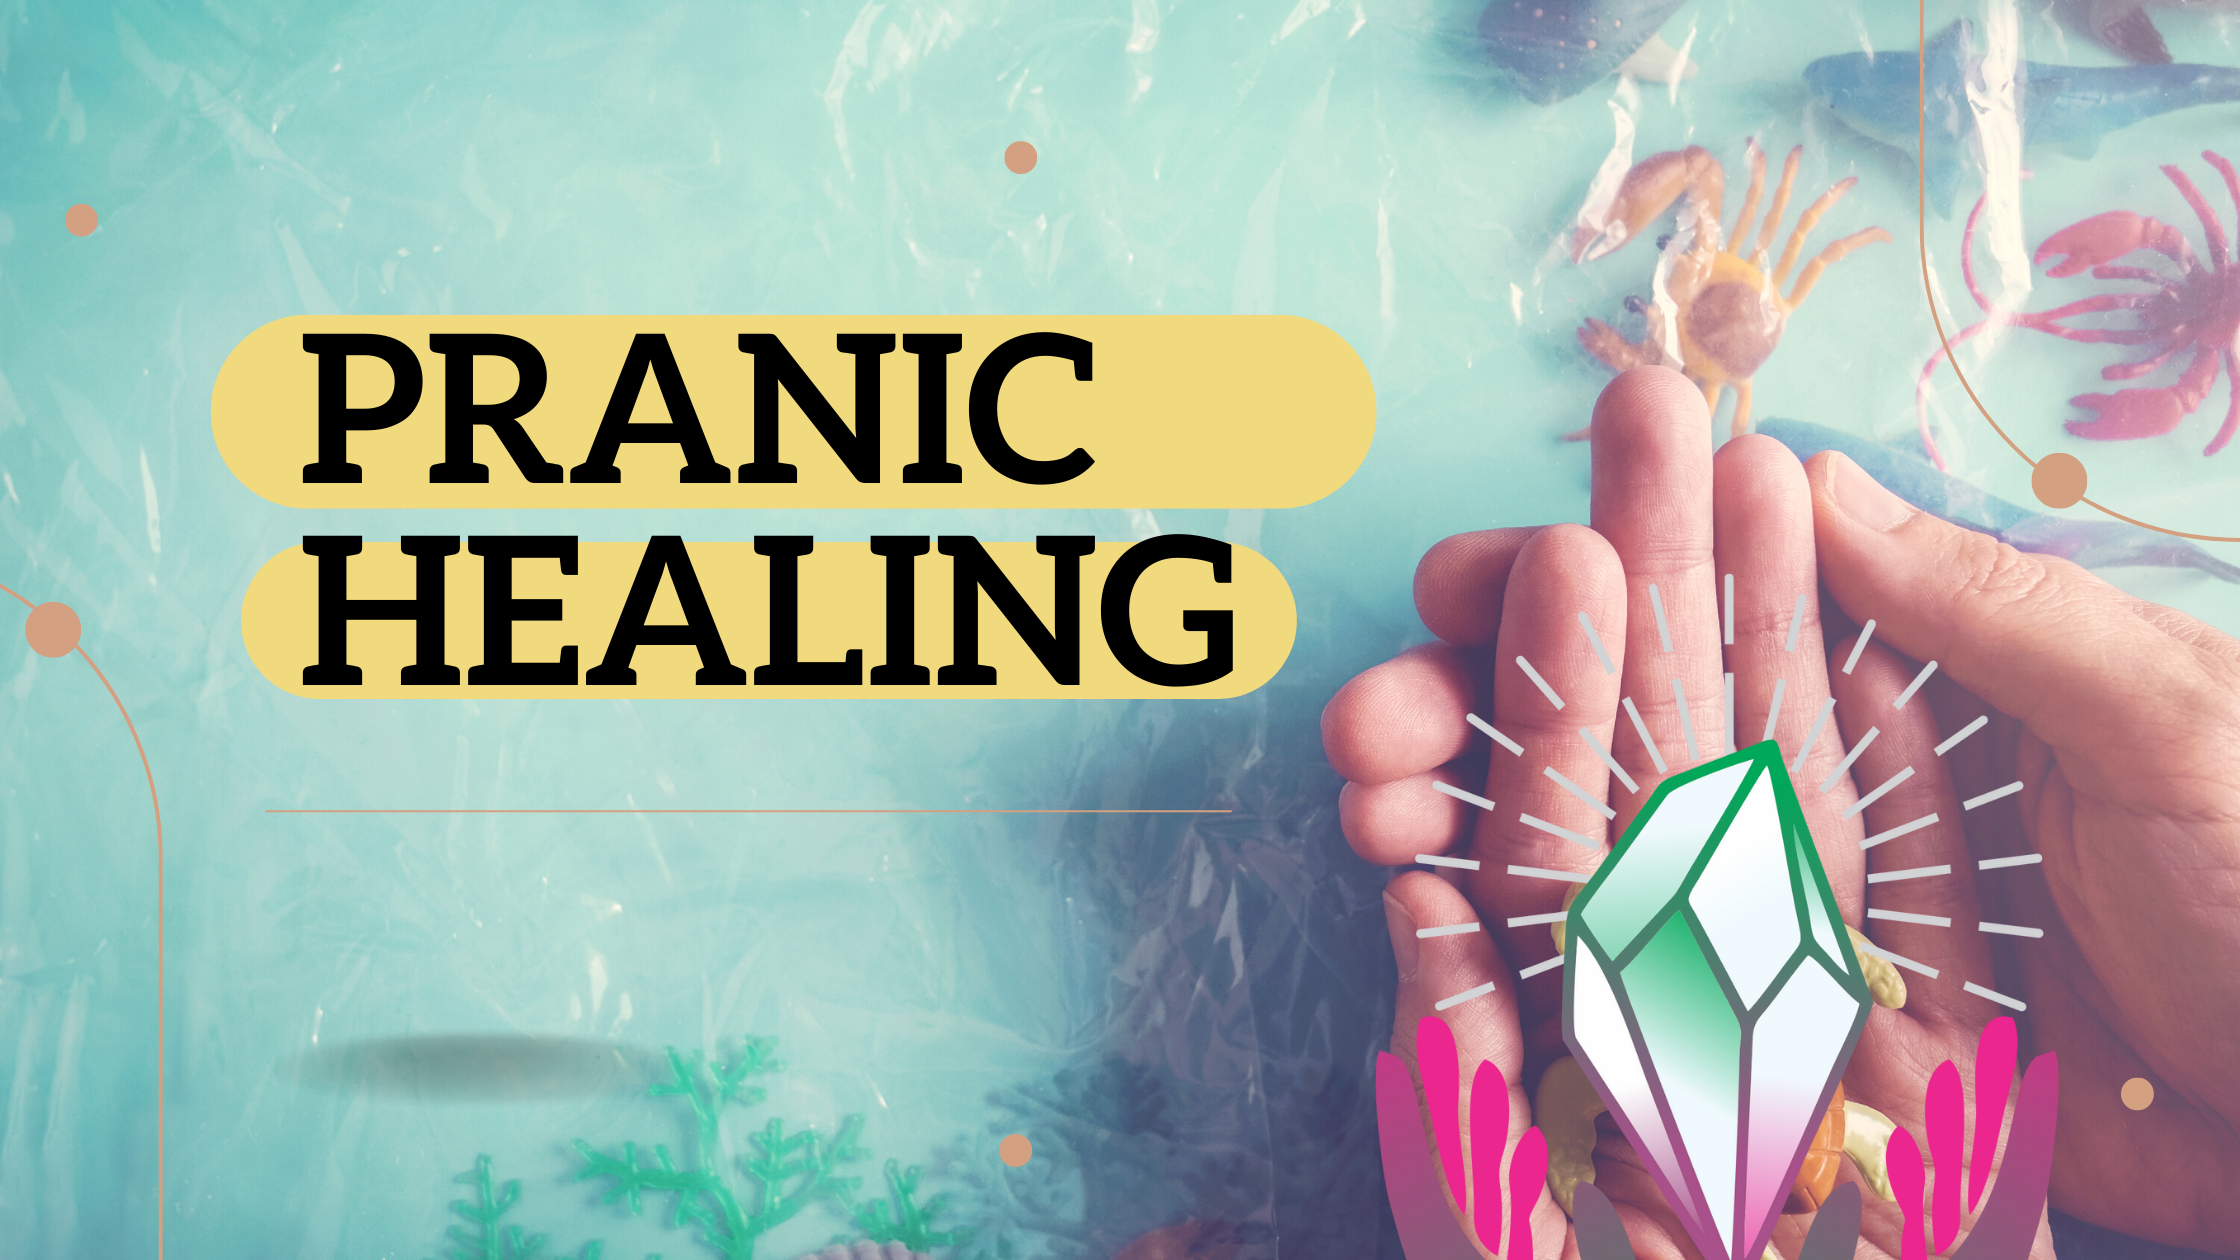 Pranic healing and it's benefits on Human Body and mind.